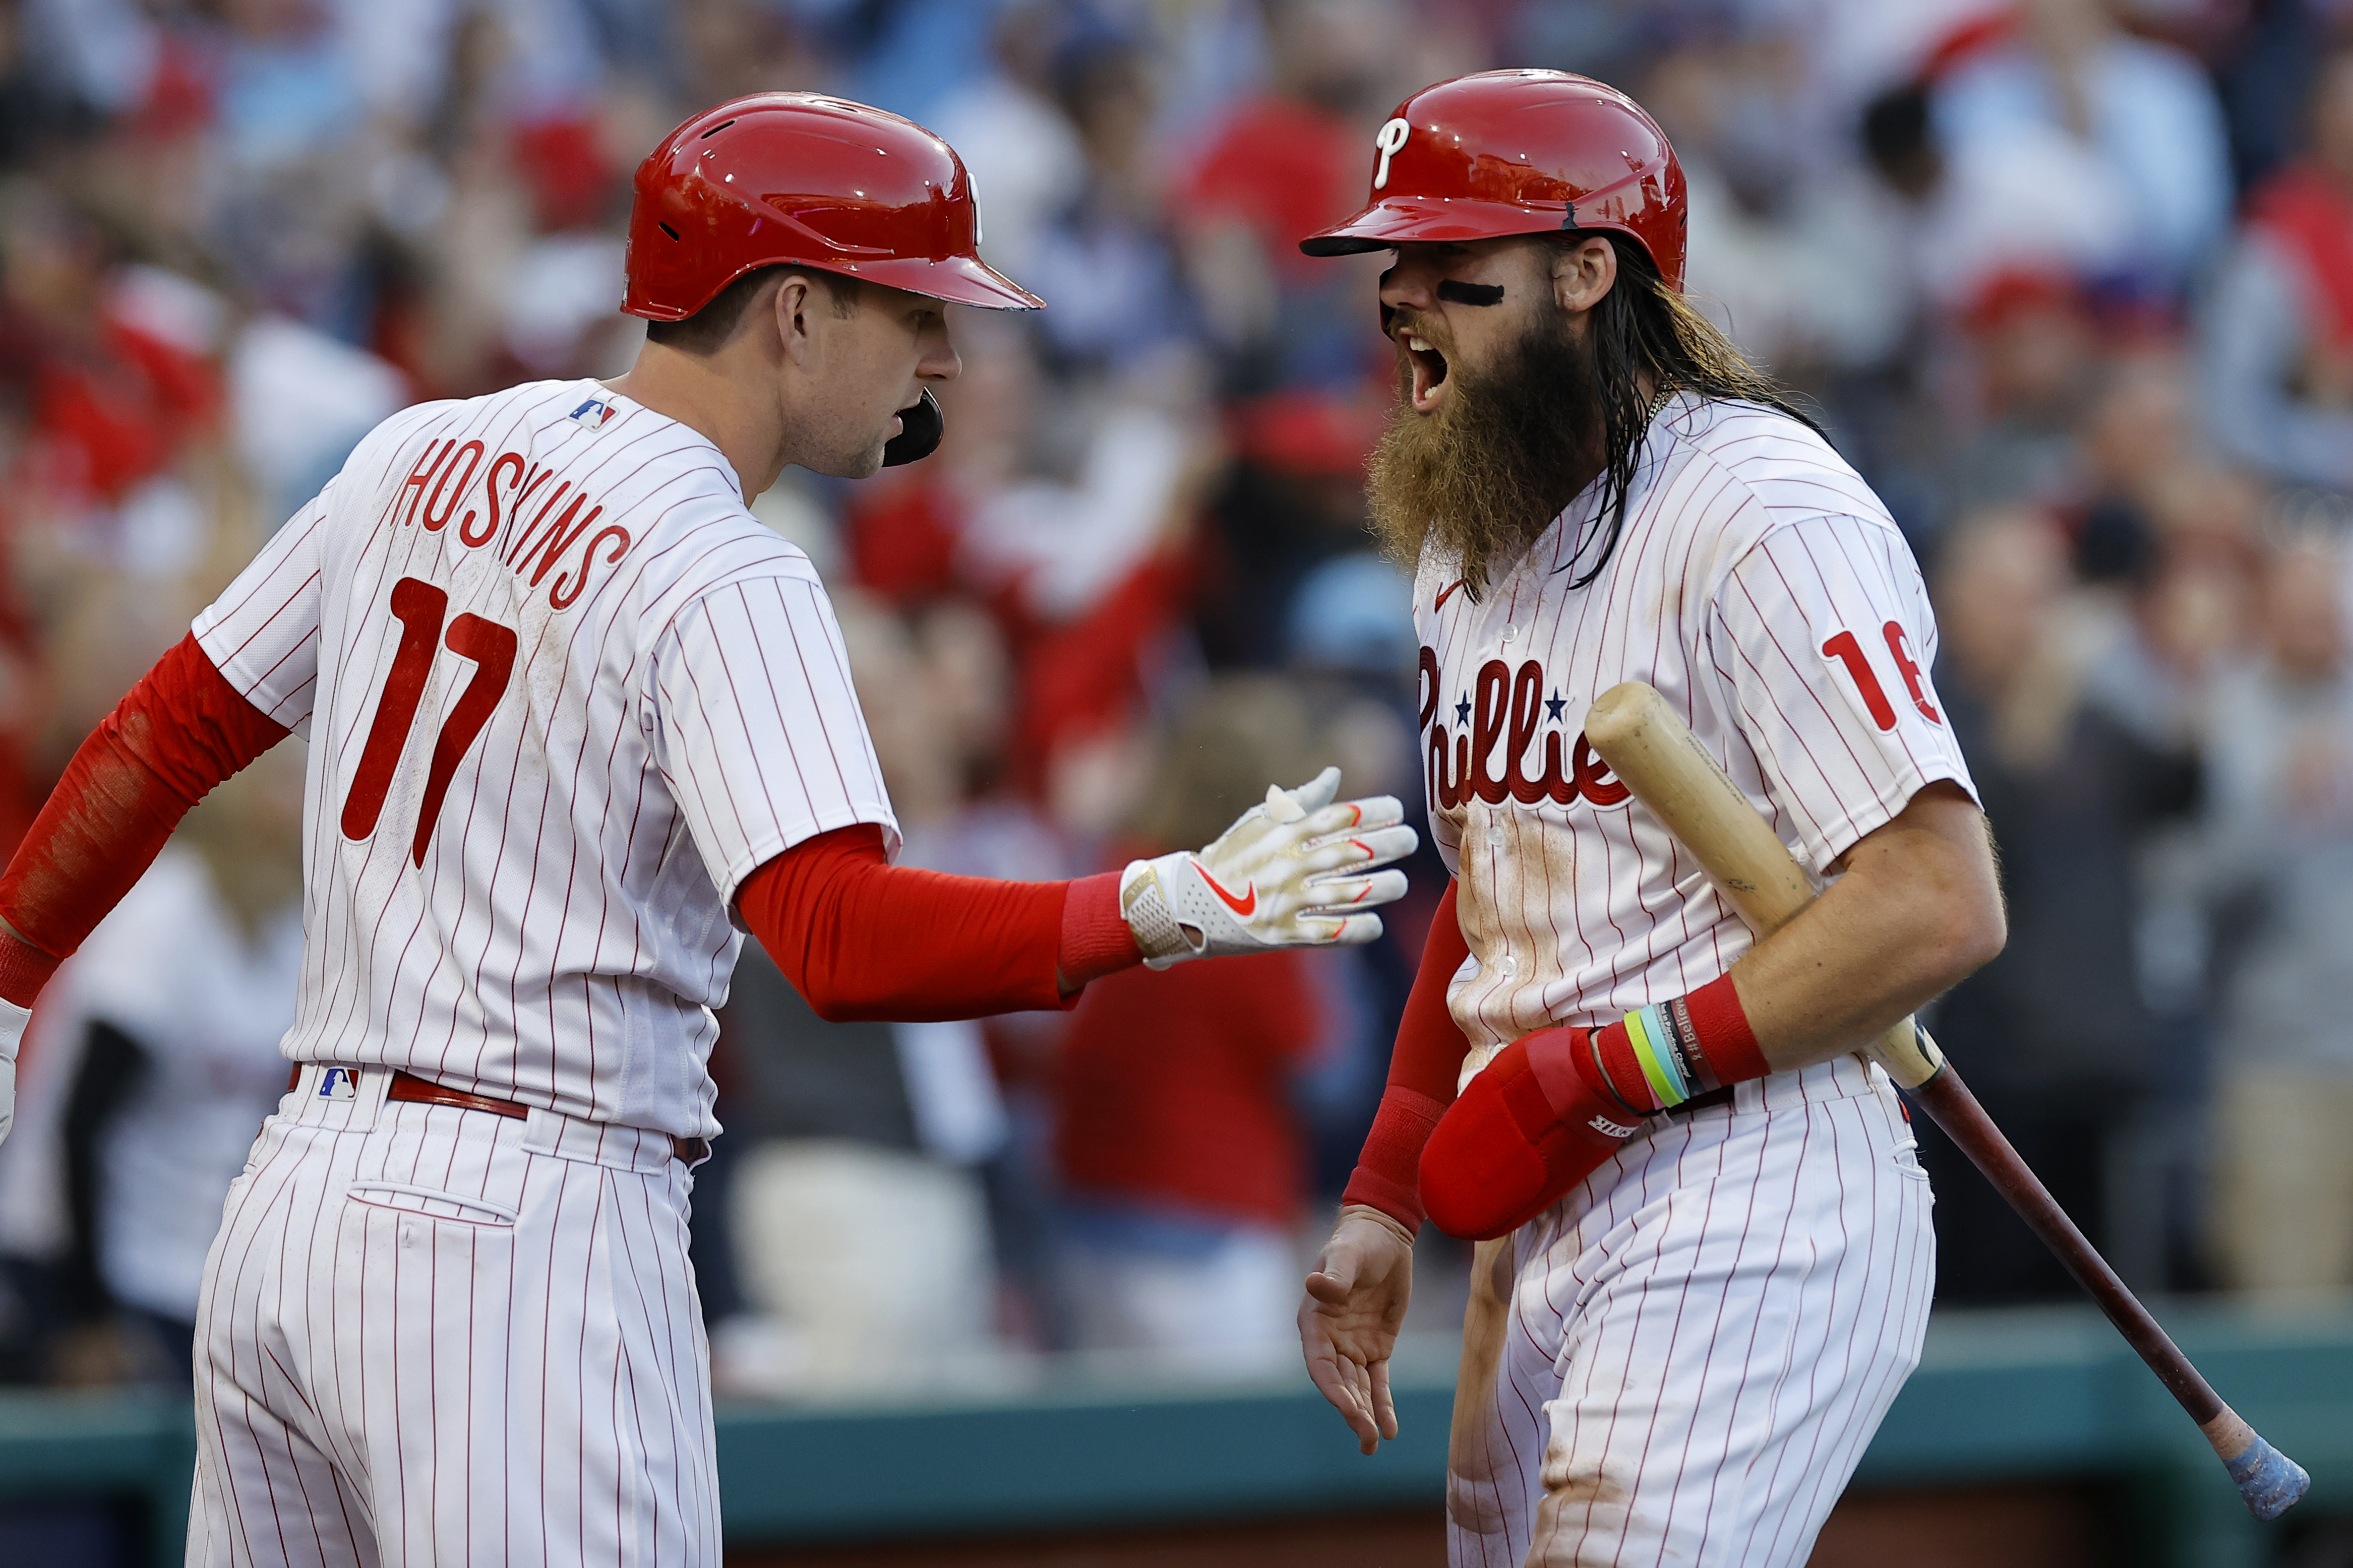 Fans react to Bryce Harper's playoff fits – NECN